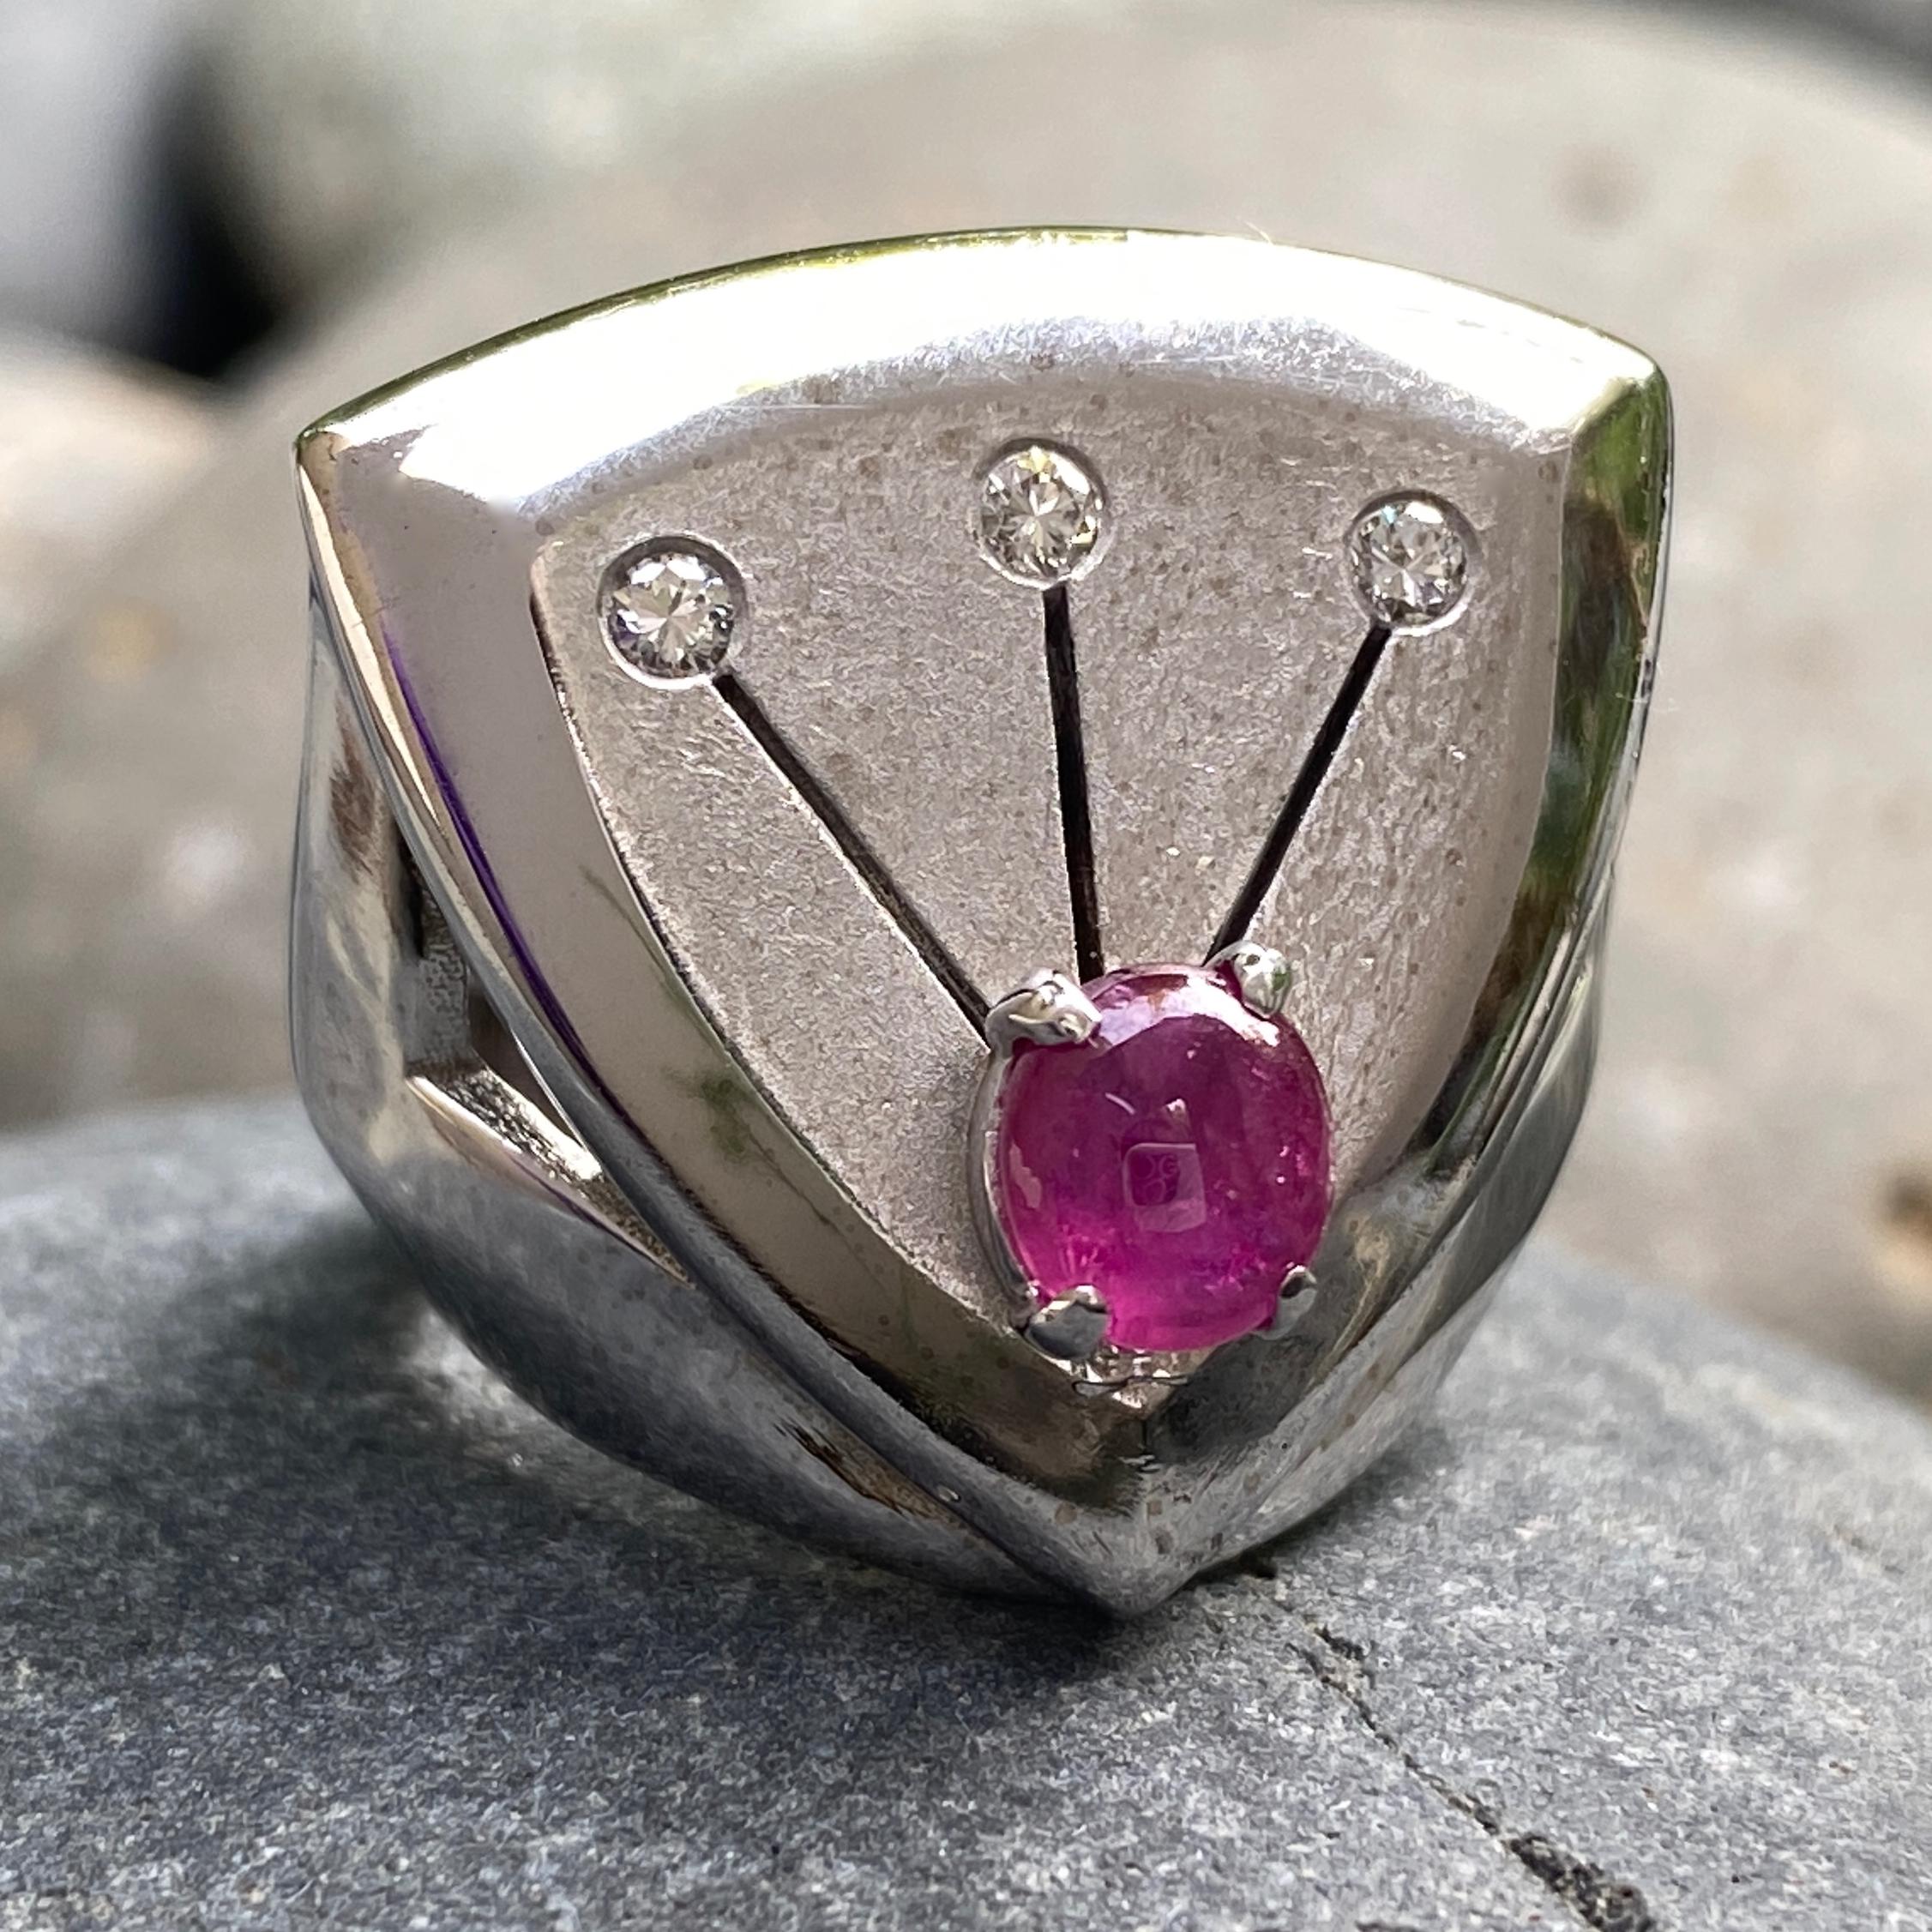 The face of this bold, modern ring started off in life as a cufflink,* probably made in the early 1970s.

Originally set with a not-aging-very-well black star sapphire, Eytan replaced it with a nice 1.02 carat natural ruby cabochon.  The diamonds